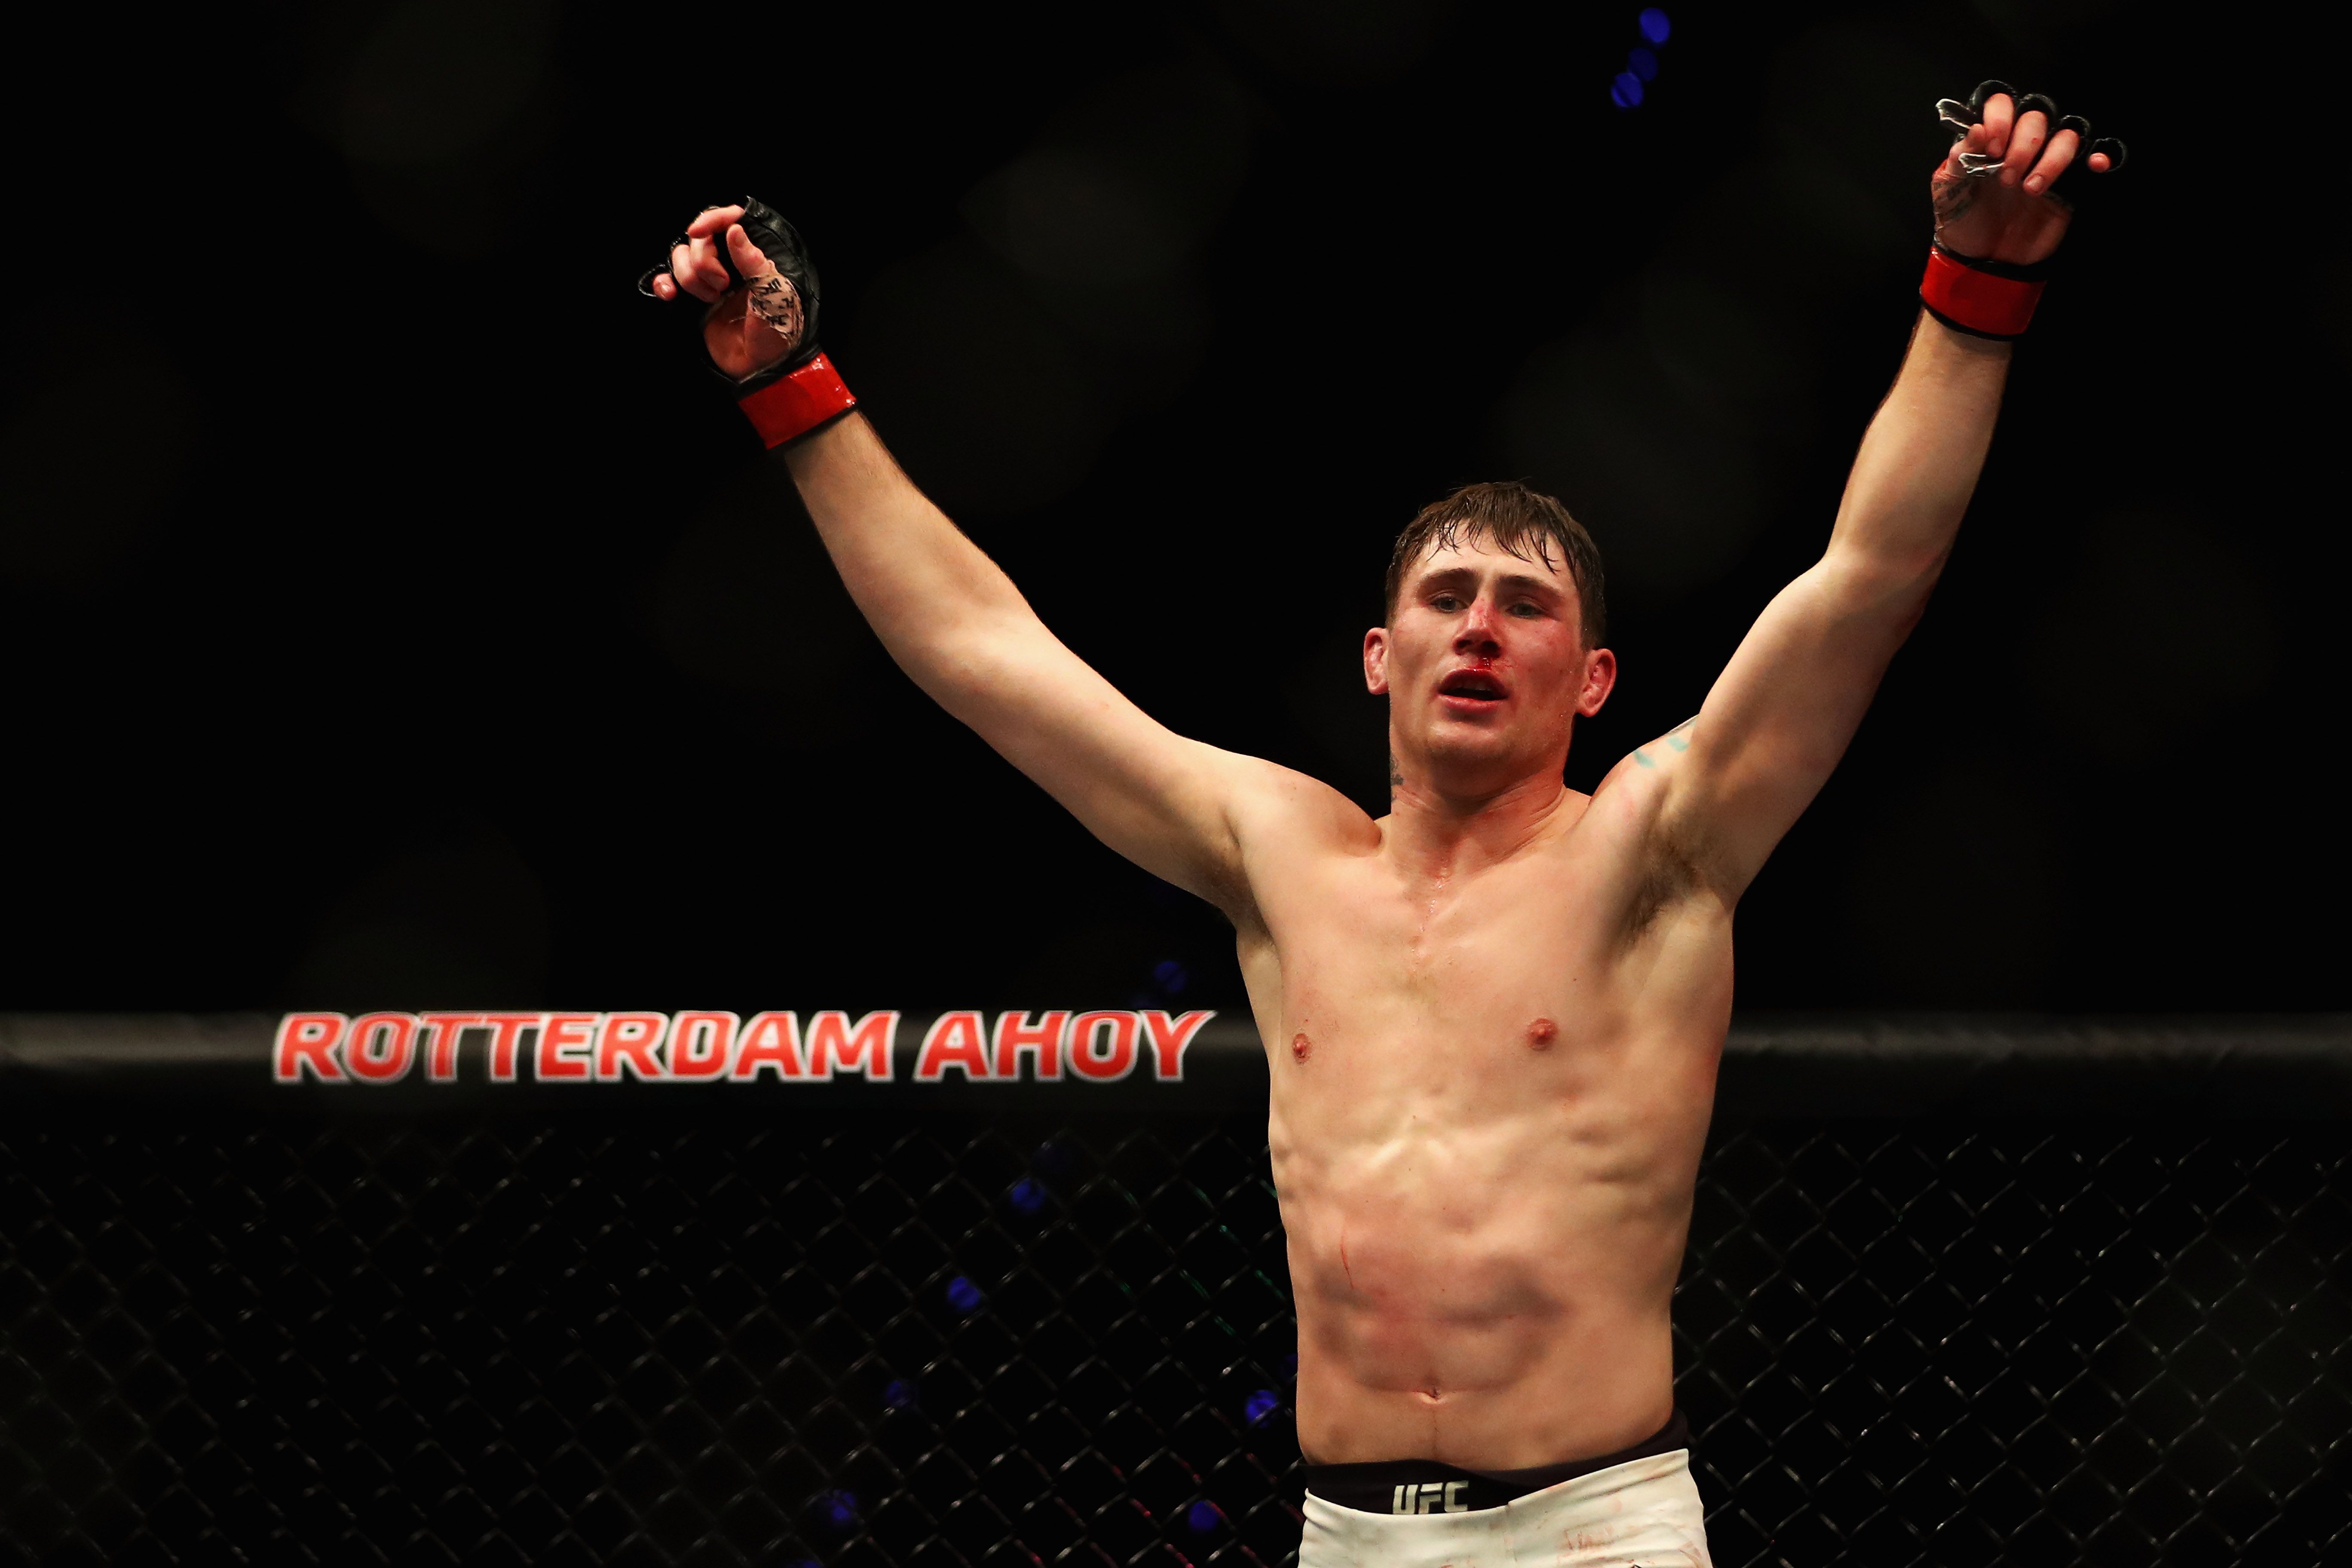 ROTTERDAM, NETHERLANDS - SEPTEMBER 02: Darren Till of England celebrates victory against Bojan Velickovic of Serbia after their Welterweight bout during the UFC Fight Night at Ahoy on September 2, 2017 in Rotterdam, Netherlands. (Photo by Dean Mouhtaropoulos/Getty Images)